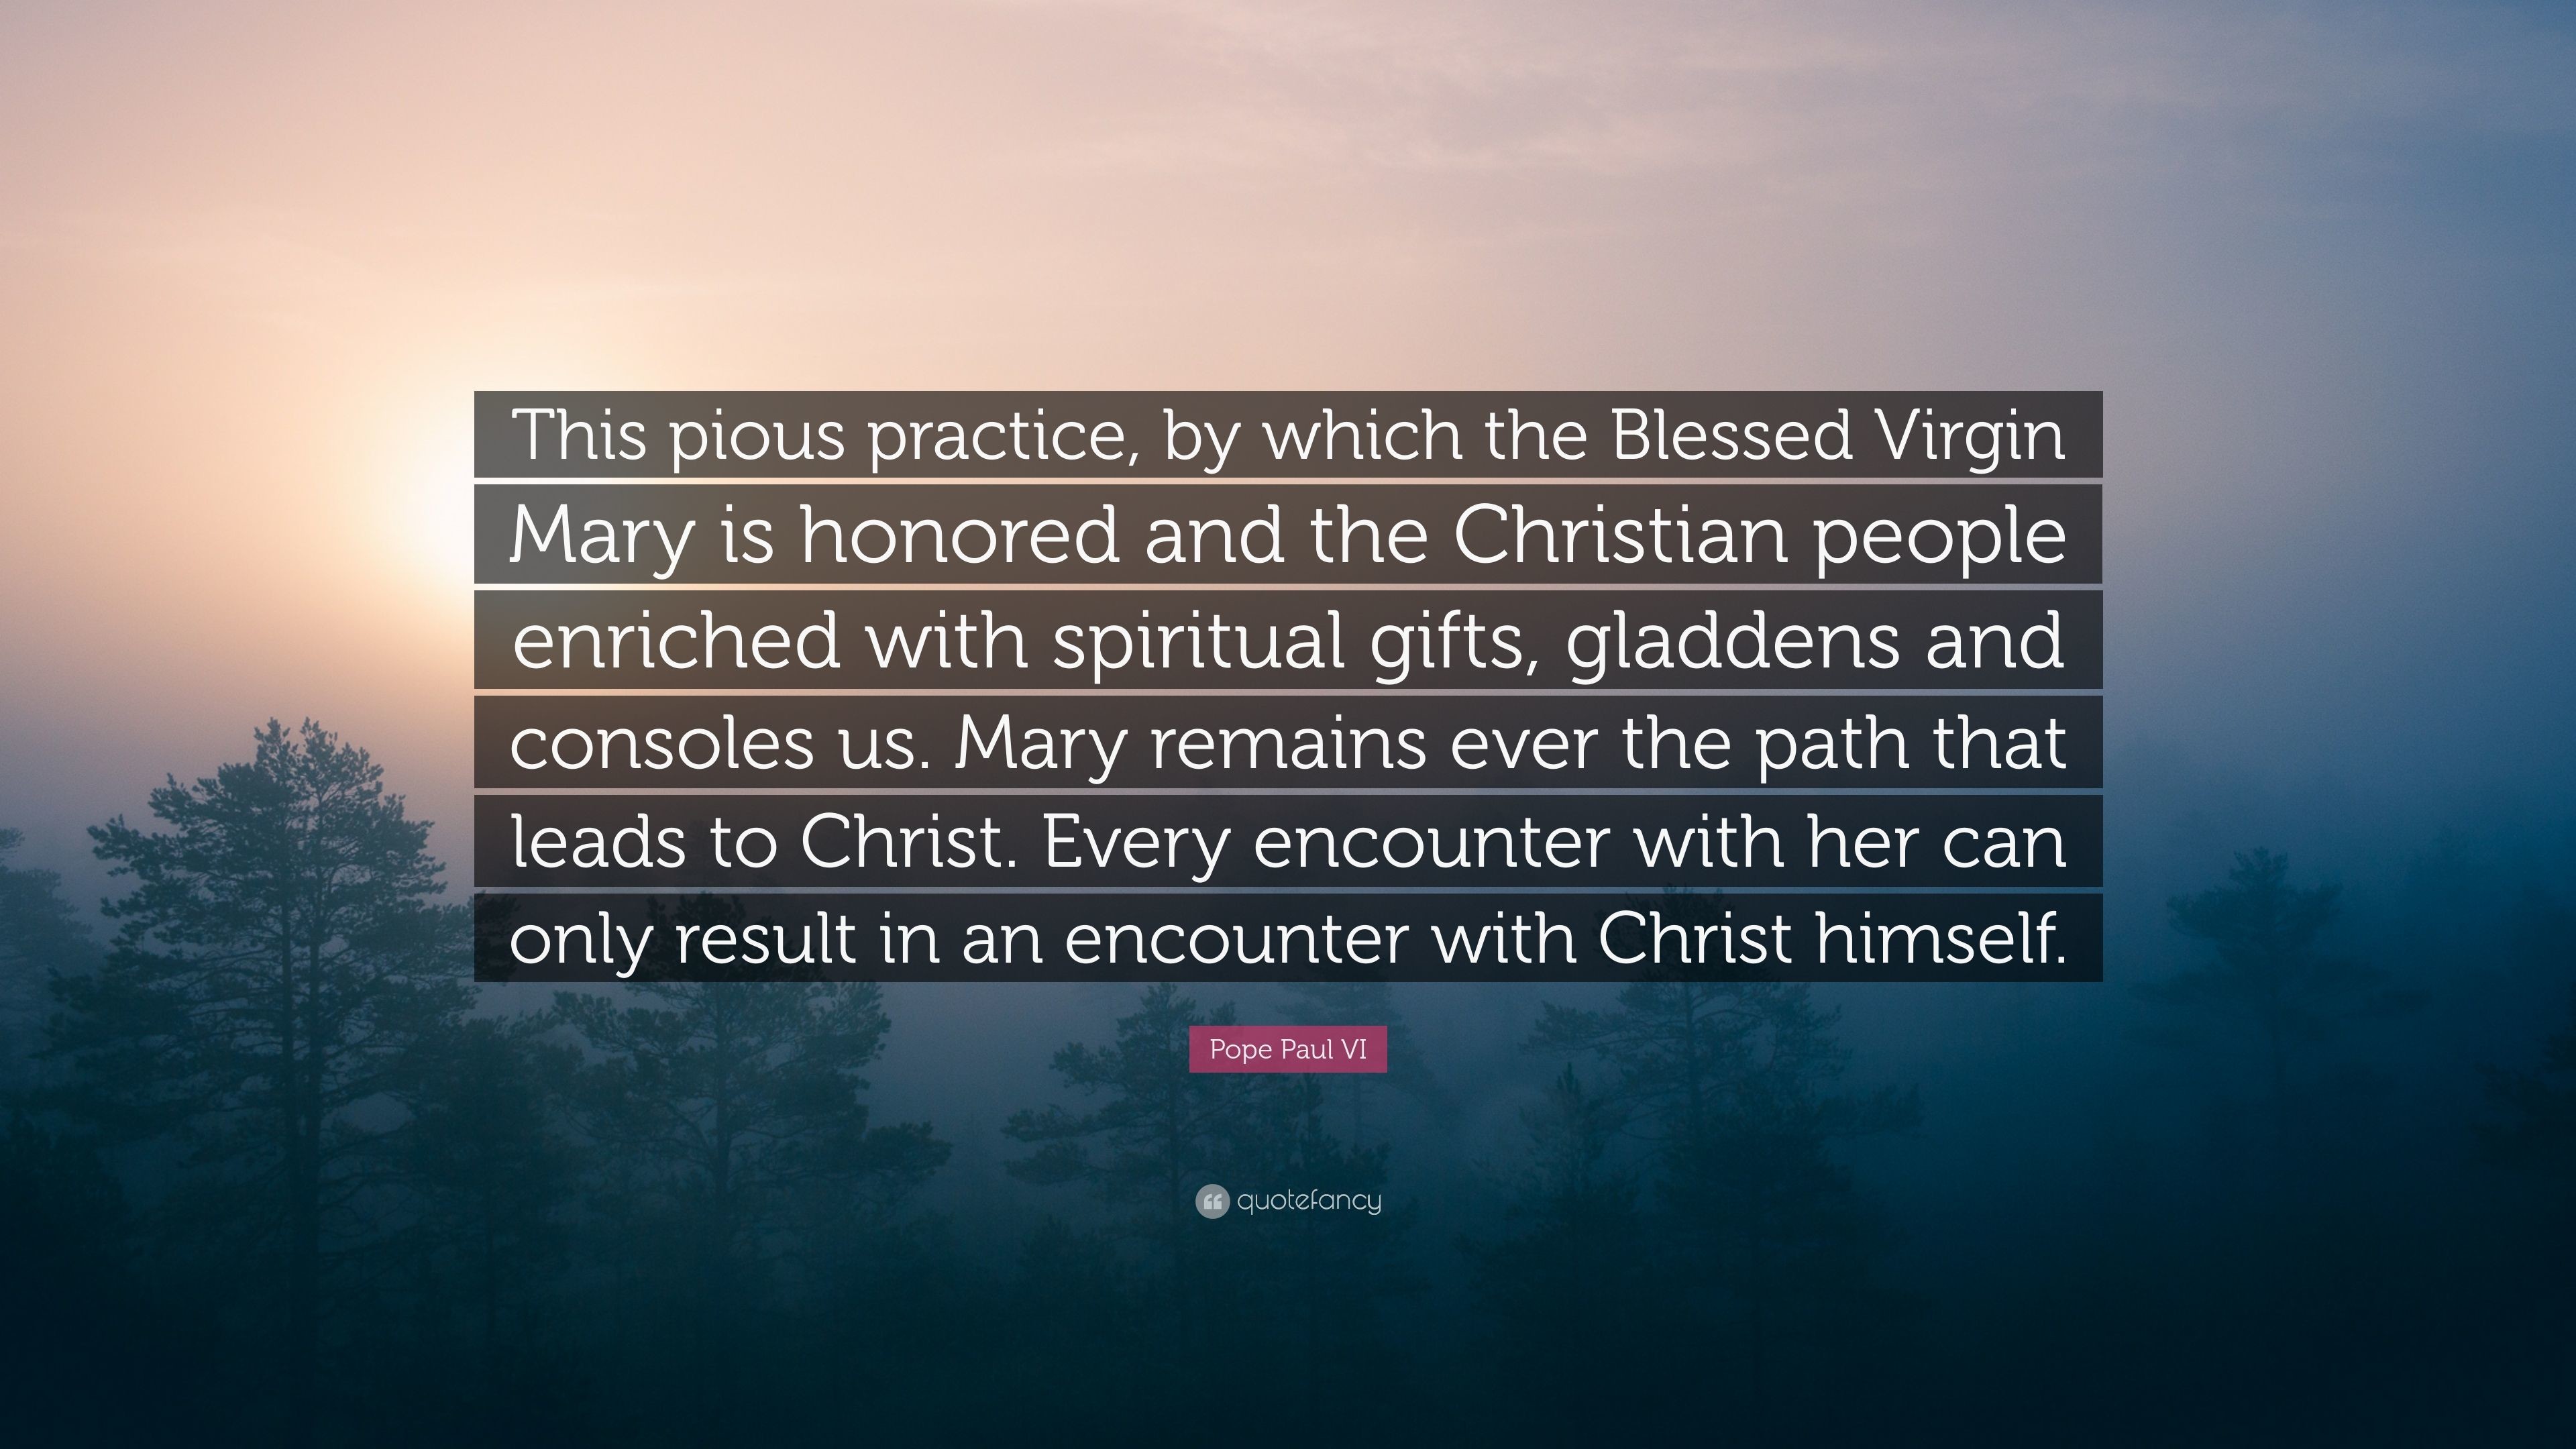 3840x2160 Pope Paul VI Quote: “This pious practice, by which the Blessed Virgin Mary